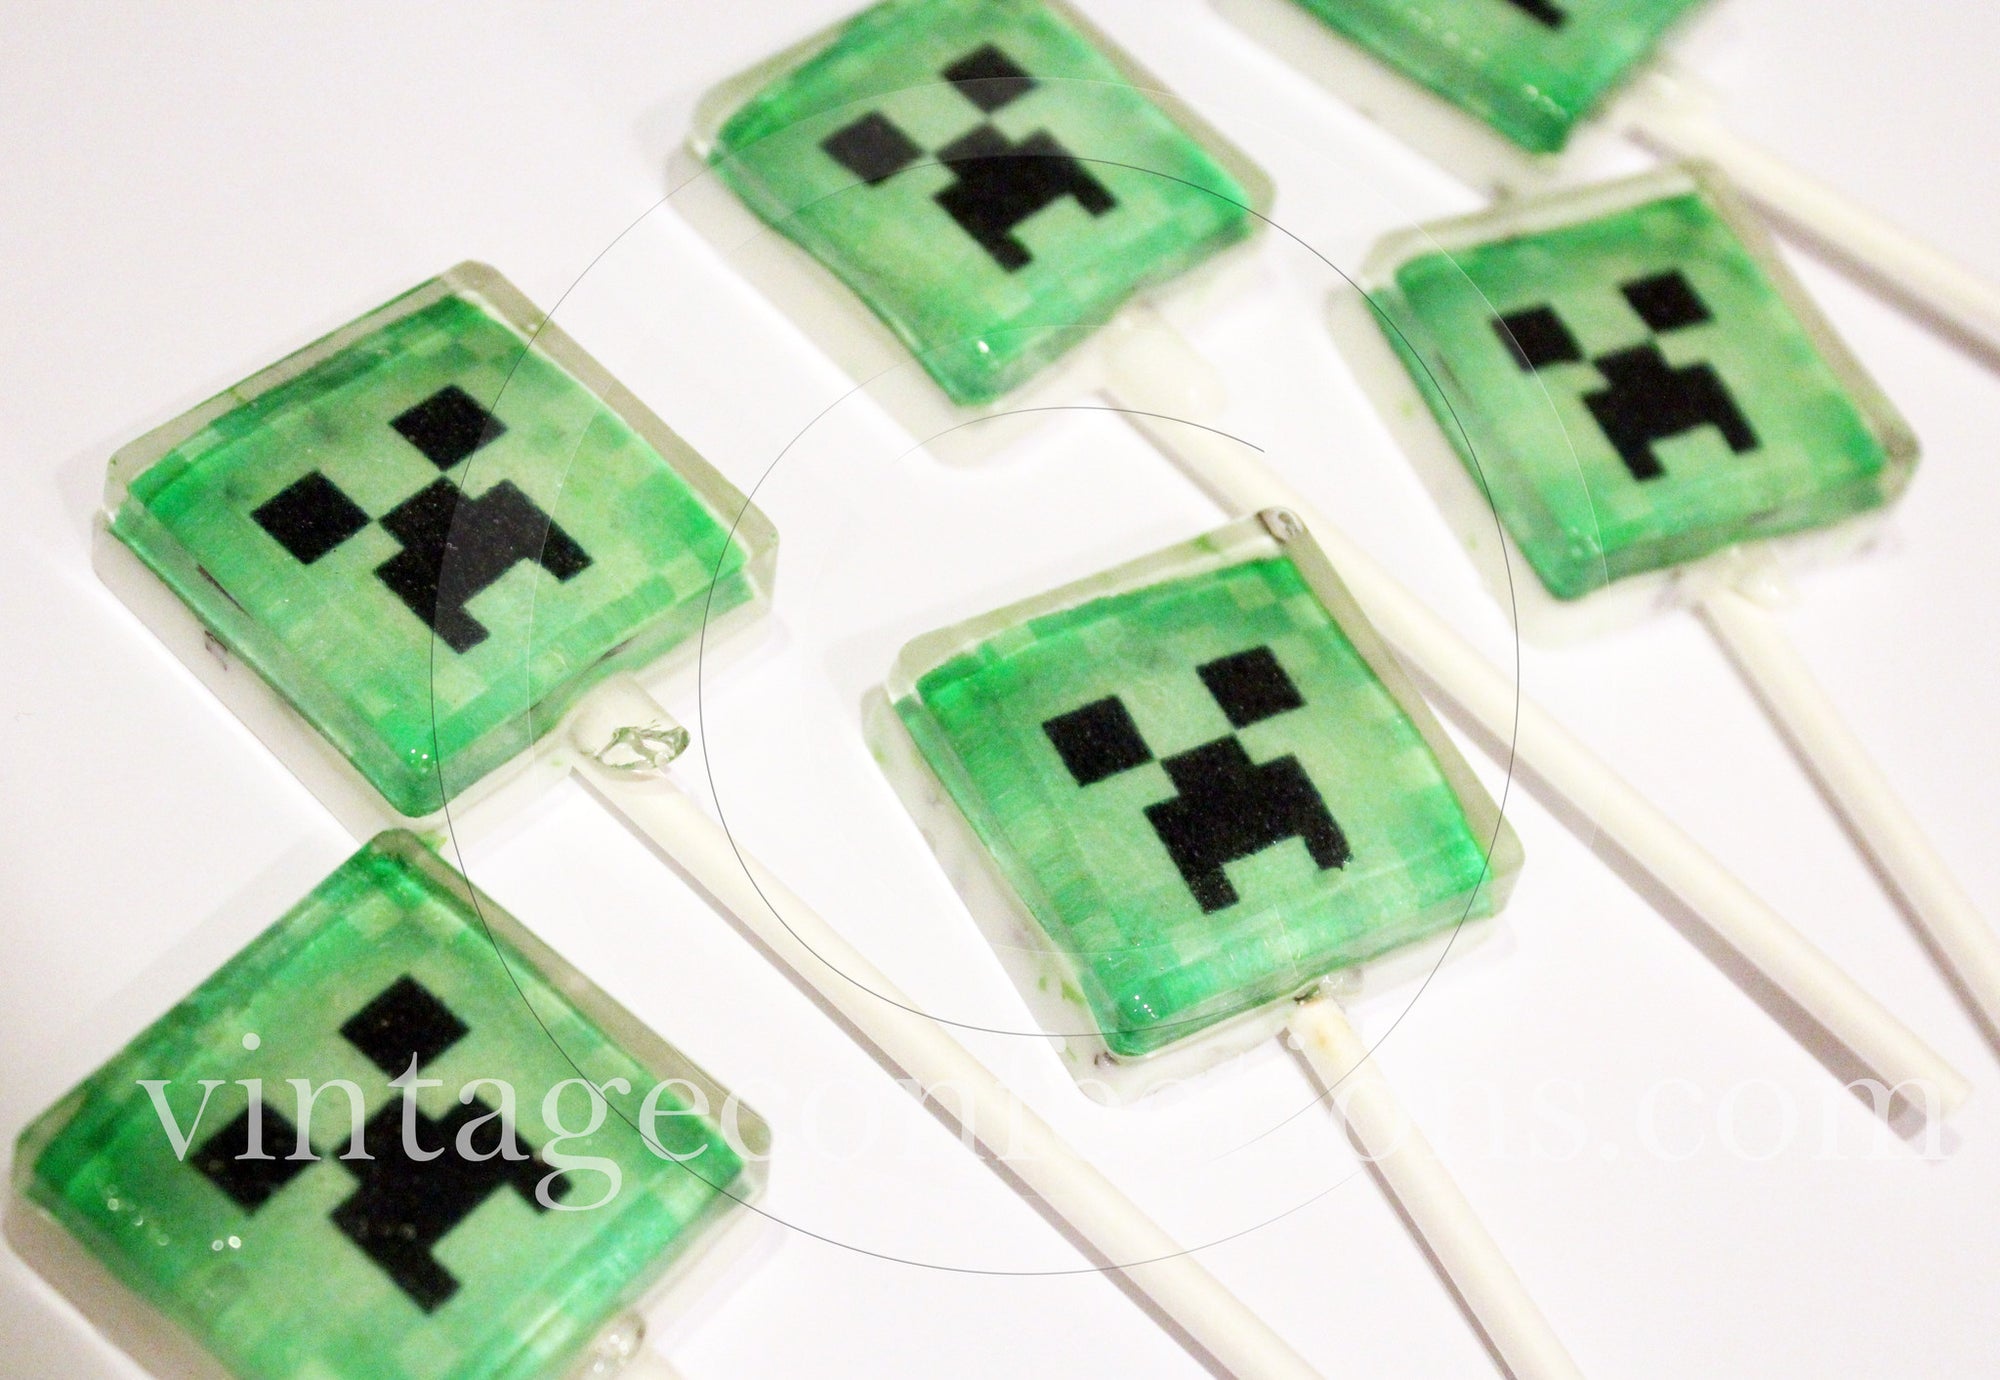 Computer Game Creeper Lollipops 5-piece set by I Want Candy!